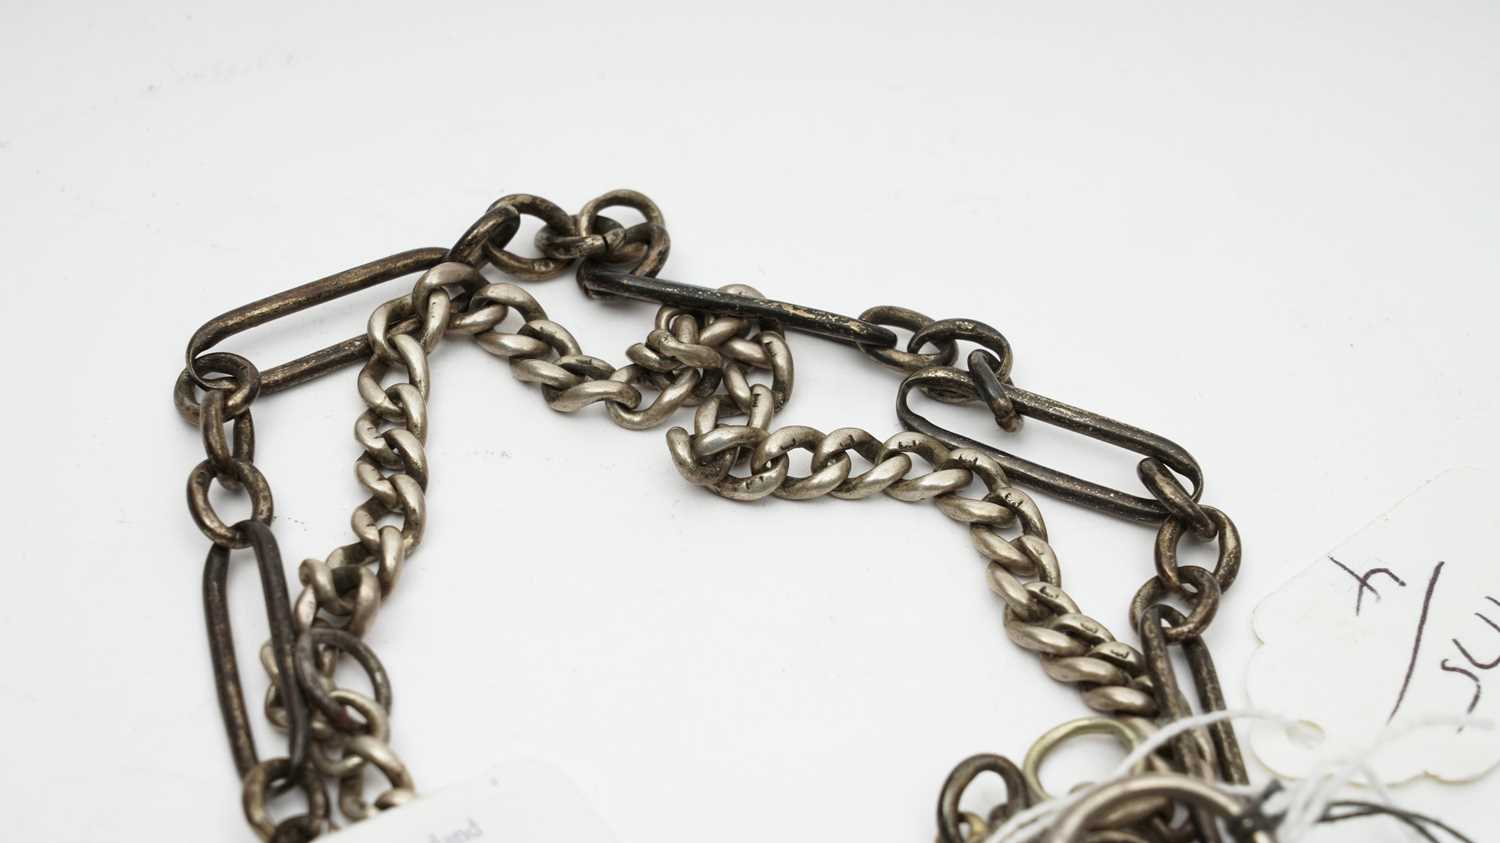 A silver case open-faced pocket watch and chains - Image 6 of 11